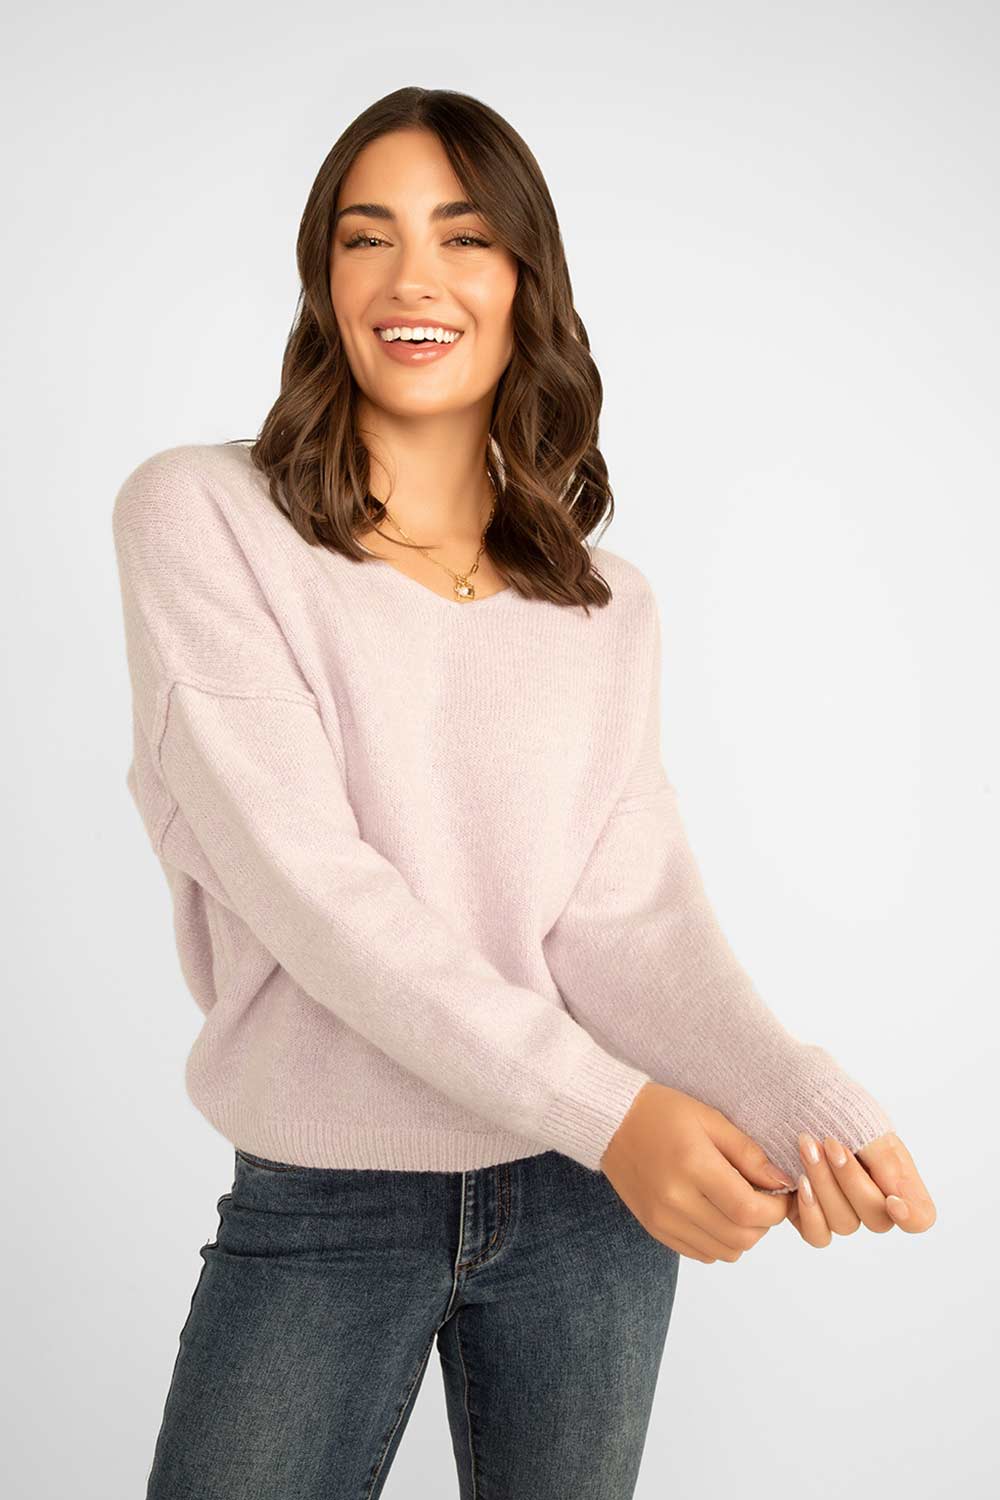 Women's Clothing ESQUALO (F2302505) V-neck Sweater in LILAC